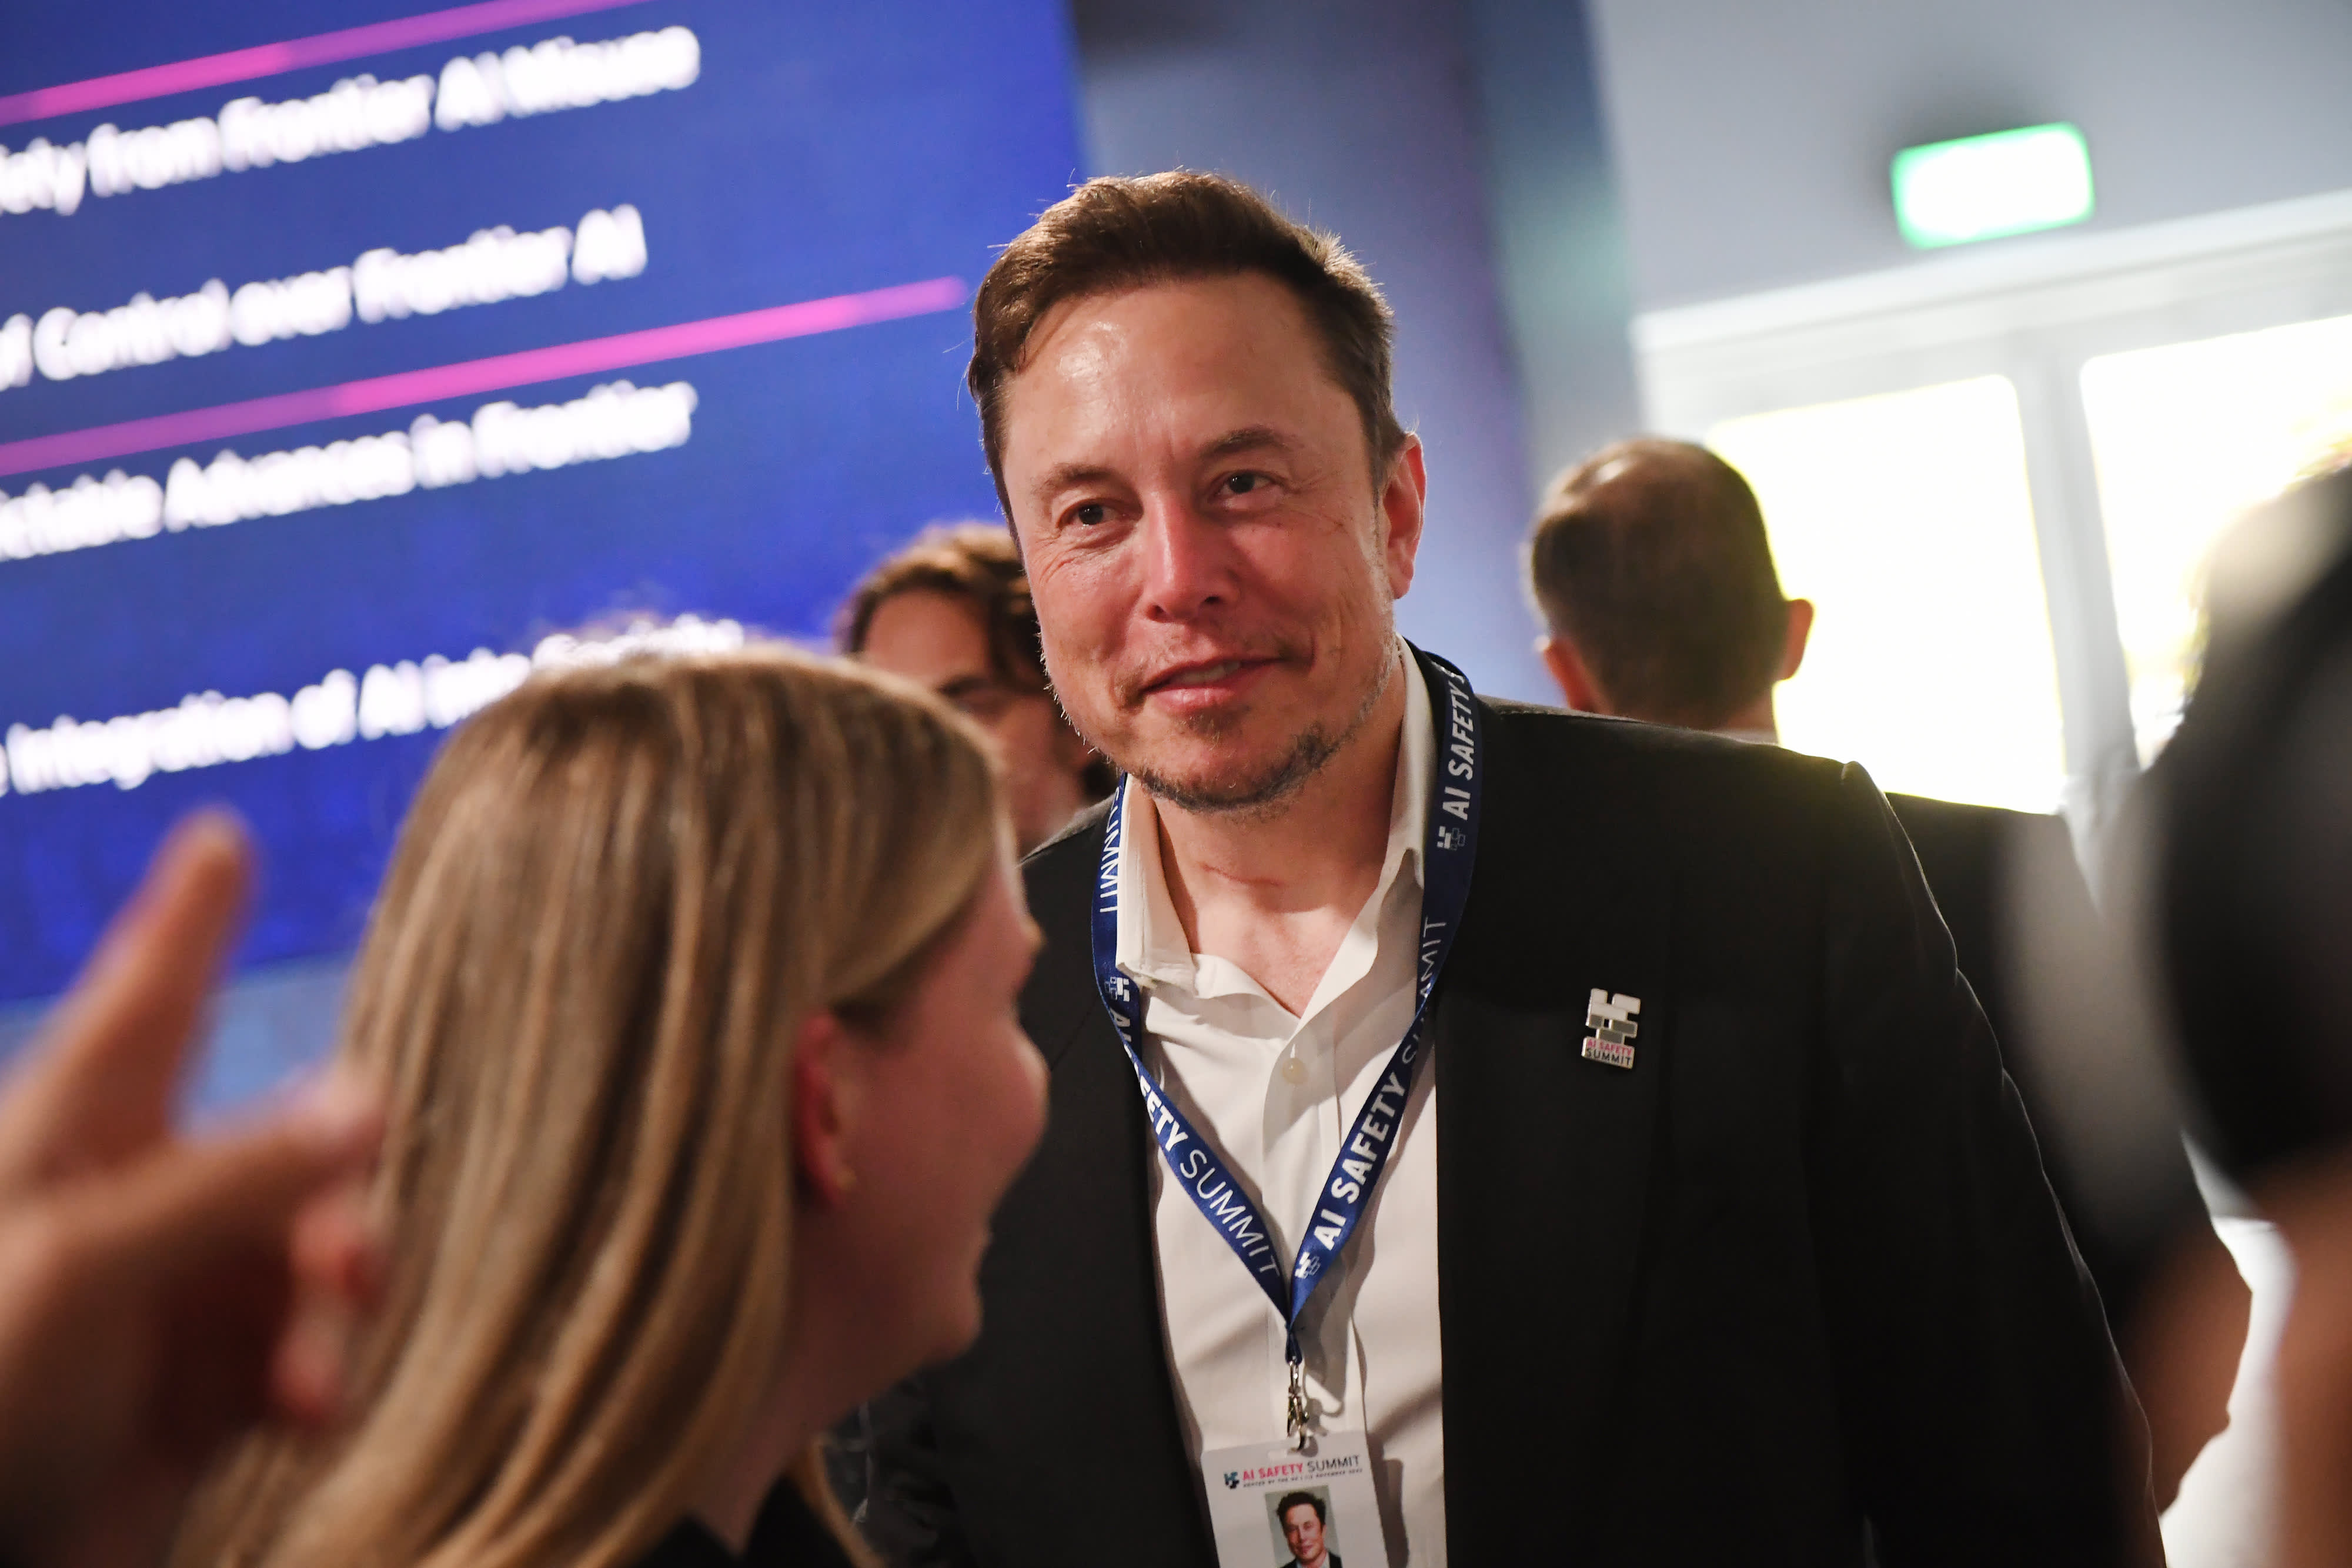 Elon Musk predicts that because of AI, there will be no need to work in the future